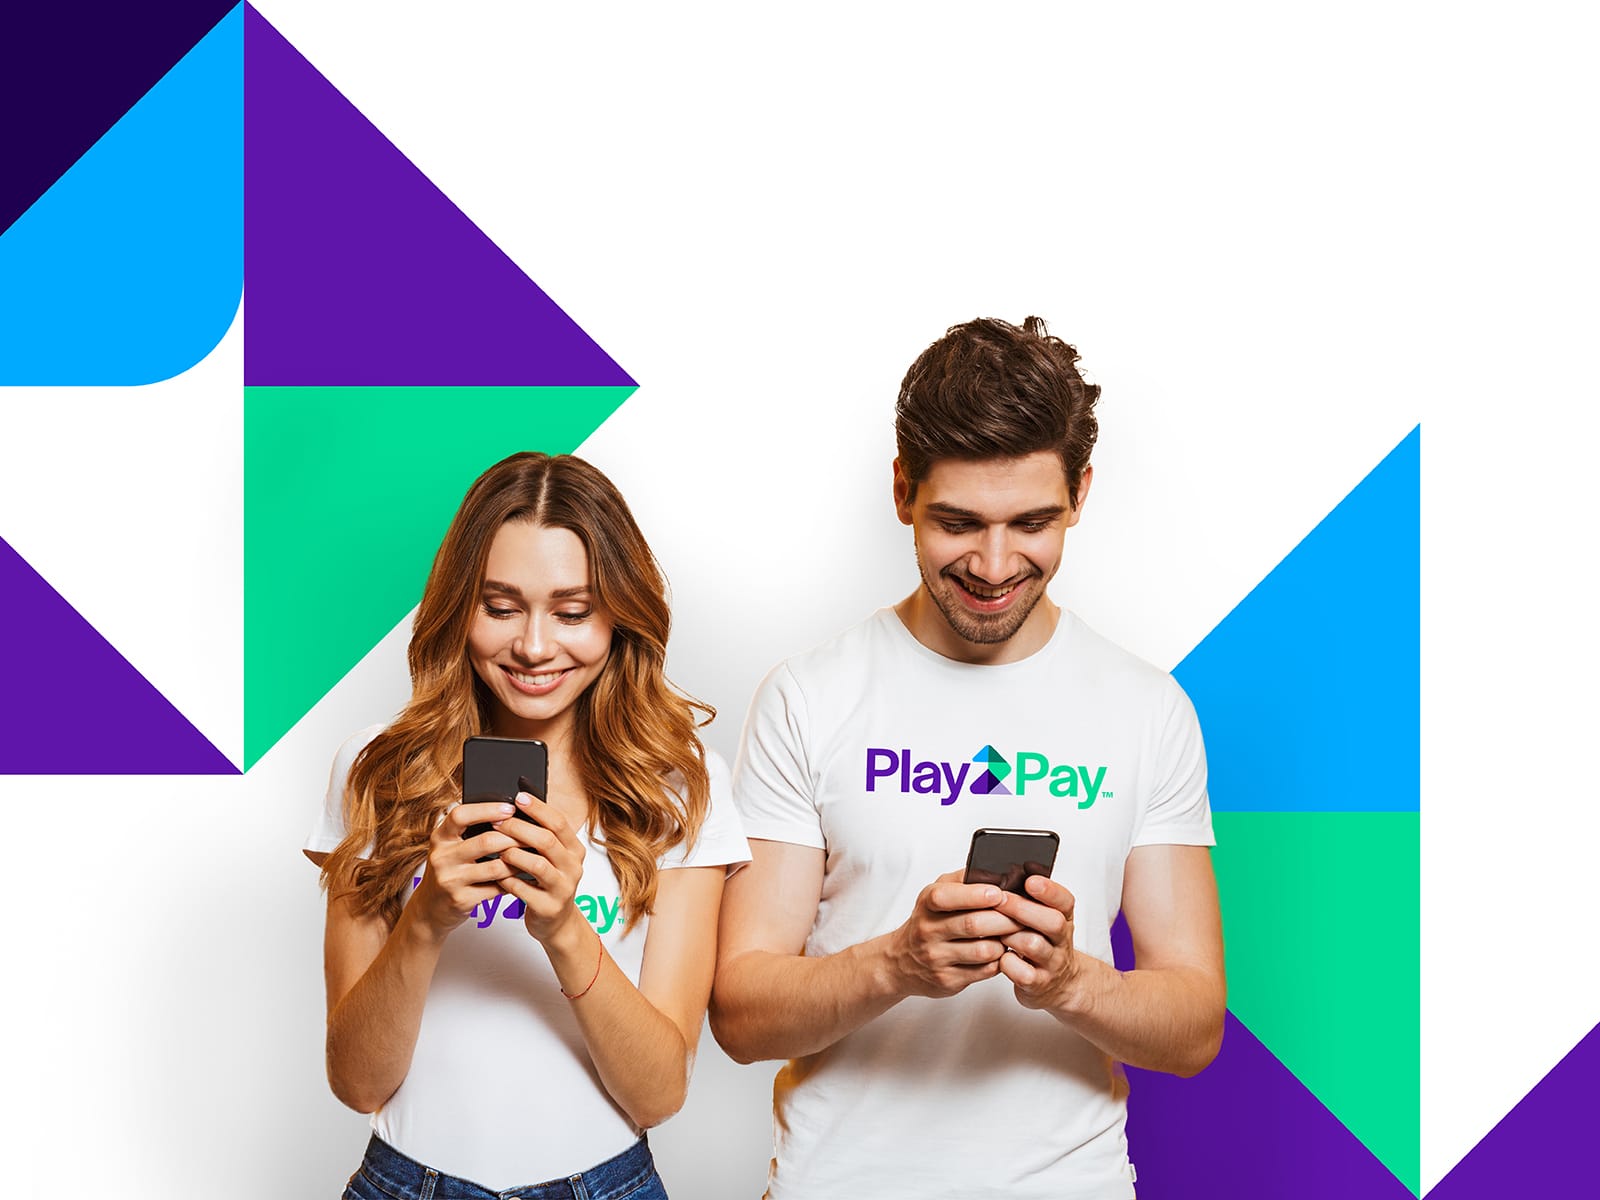 play2pay brand photo to receive 13 million in funding